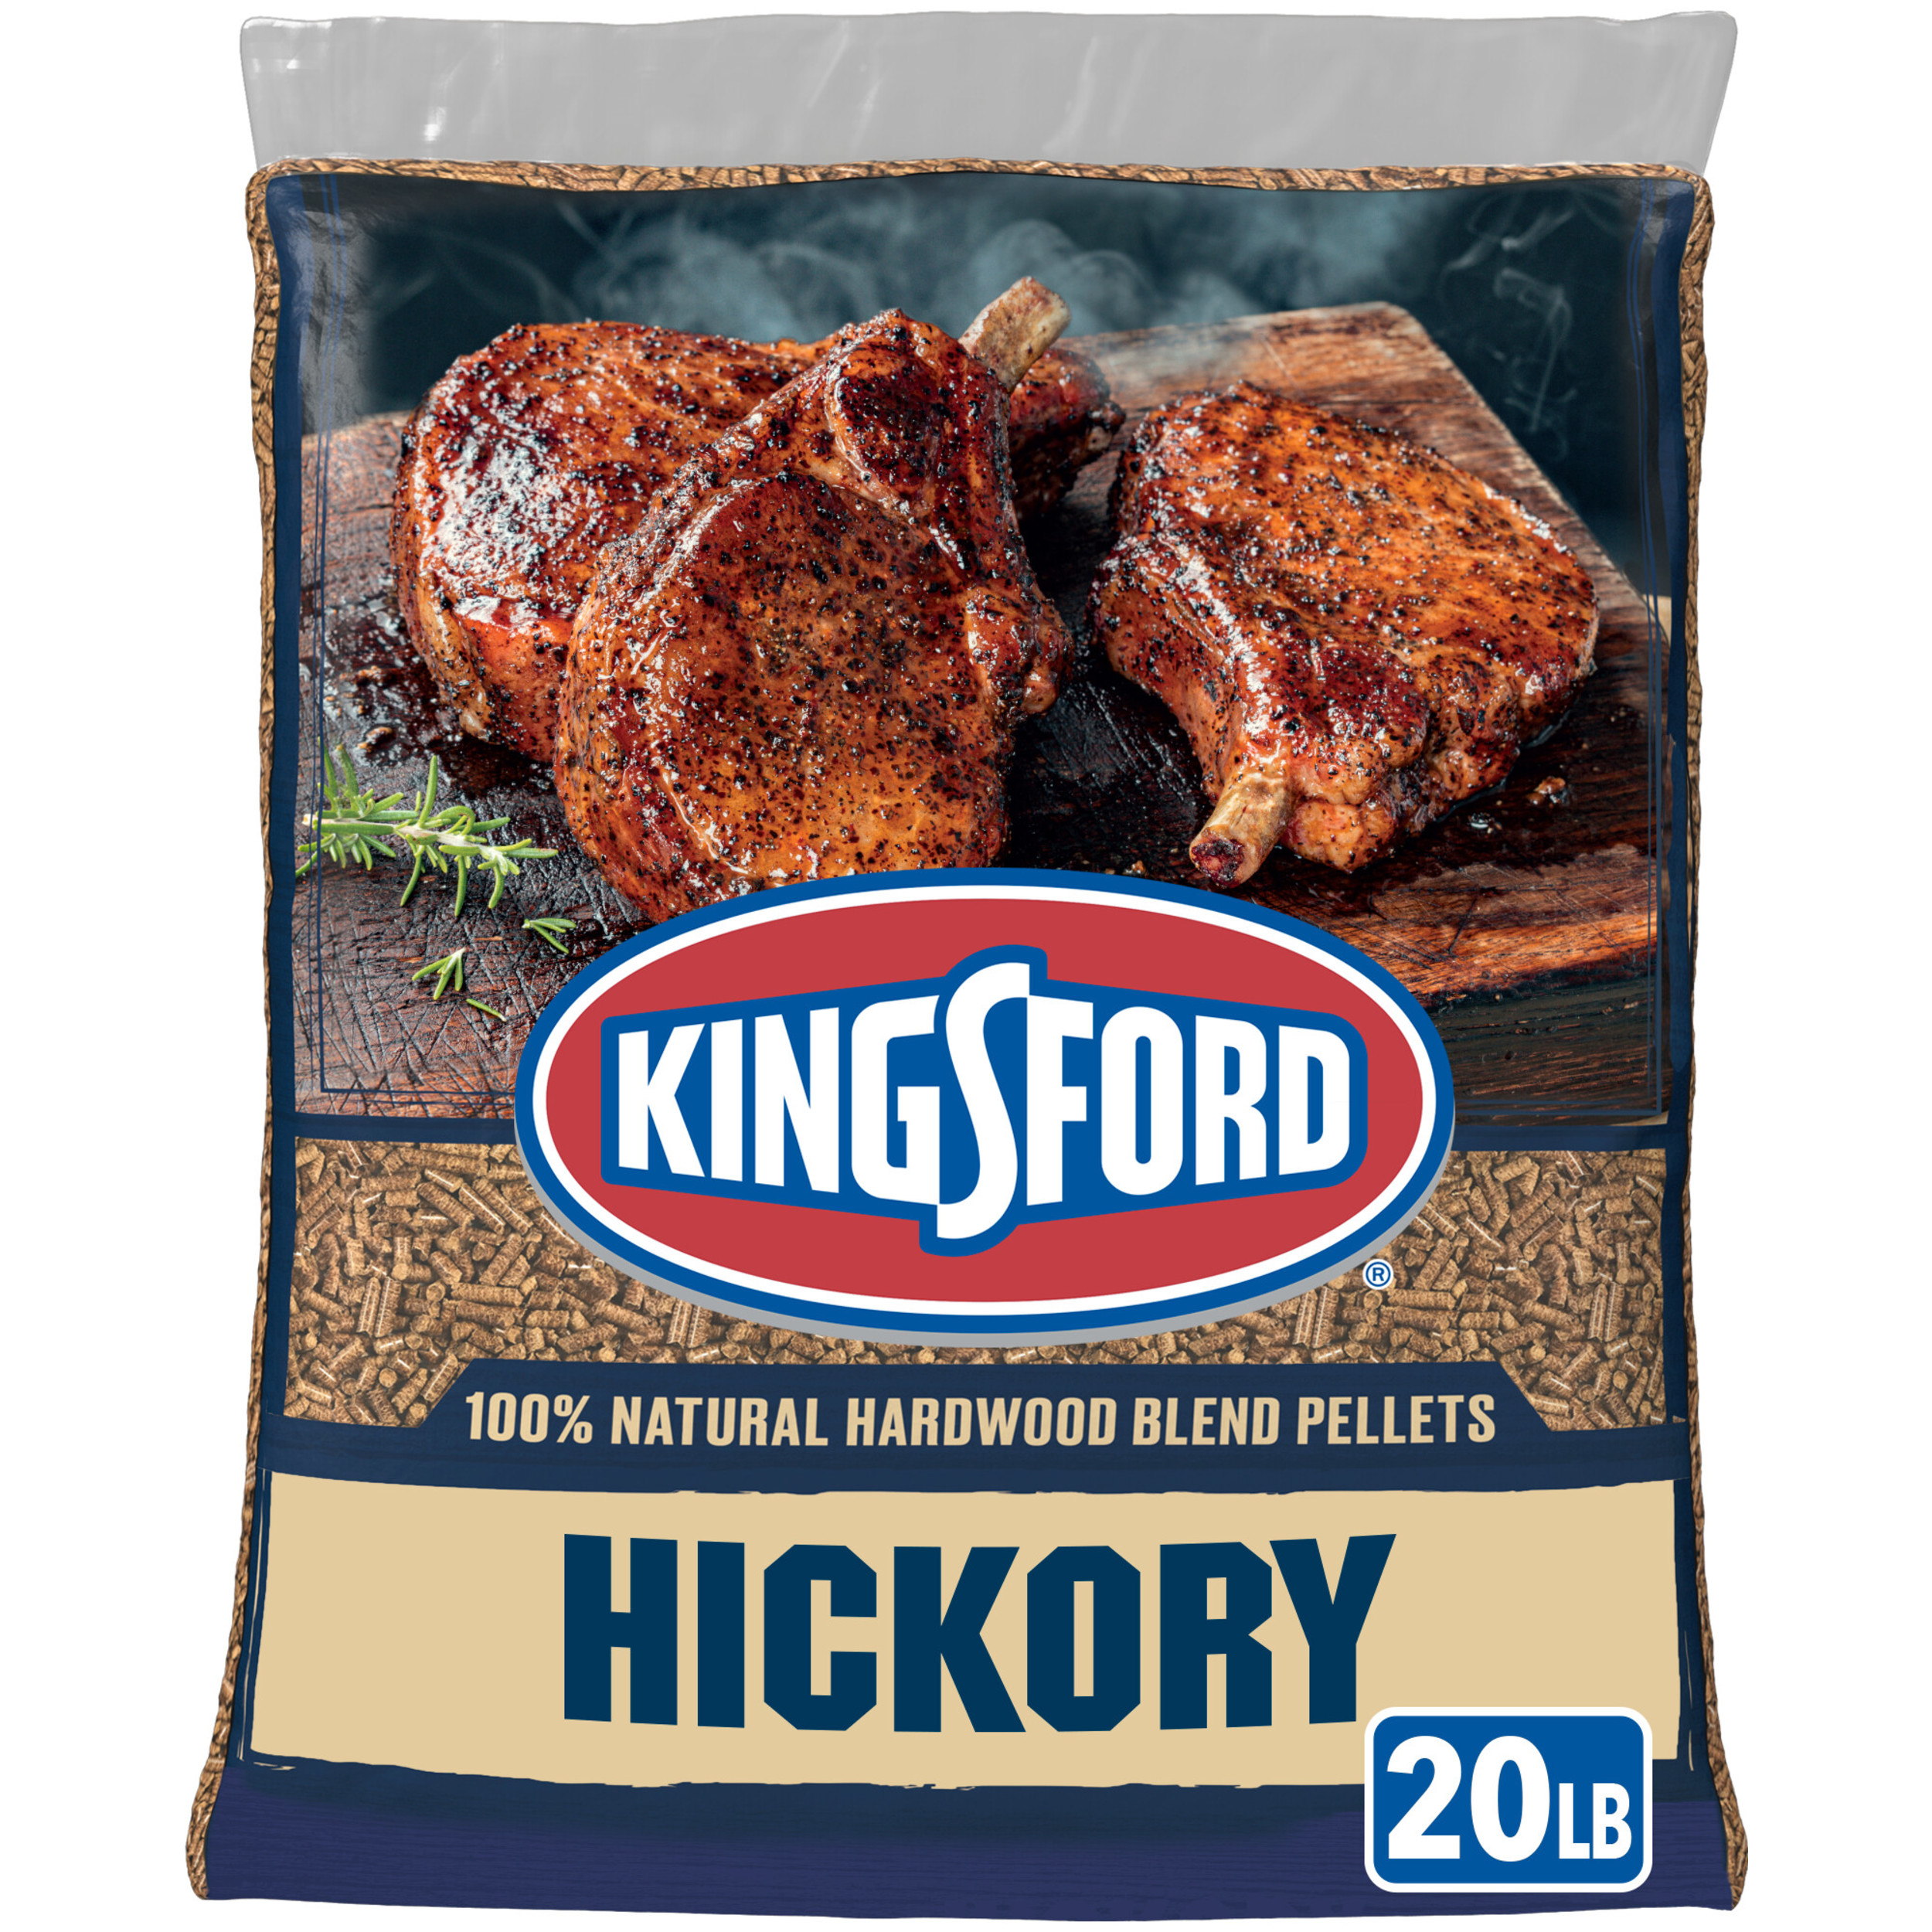 Kingsford 100% Hickory Wood Pellets, BBQ Pellets for Grilling, 20 Pounds - image 1 of 8